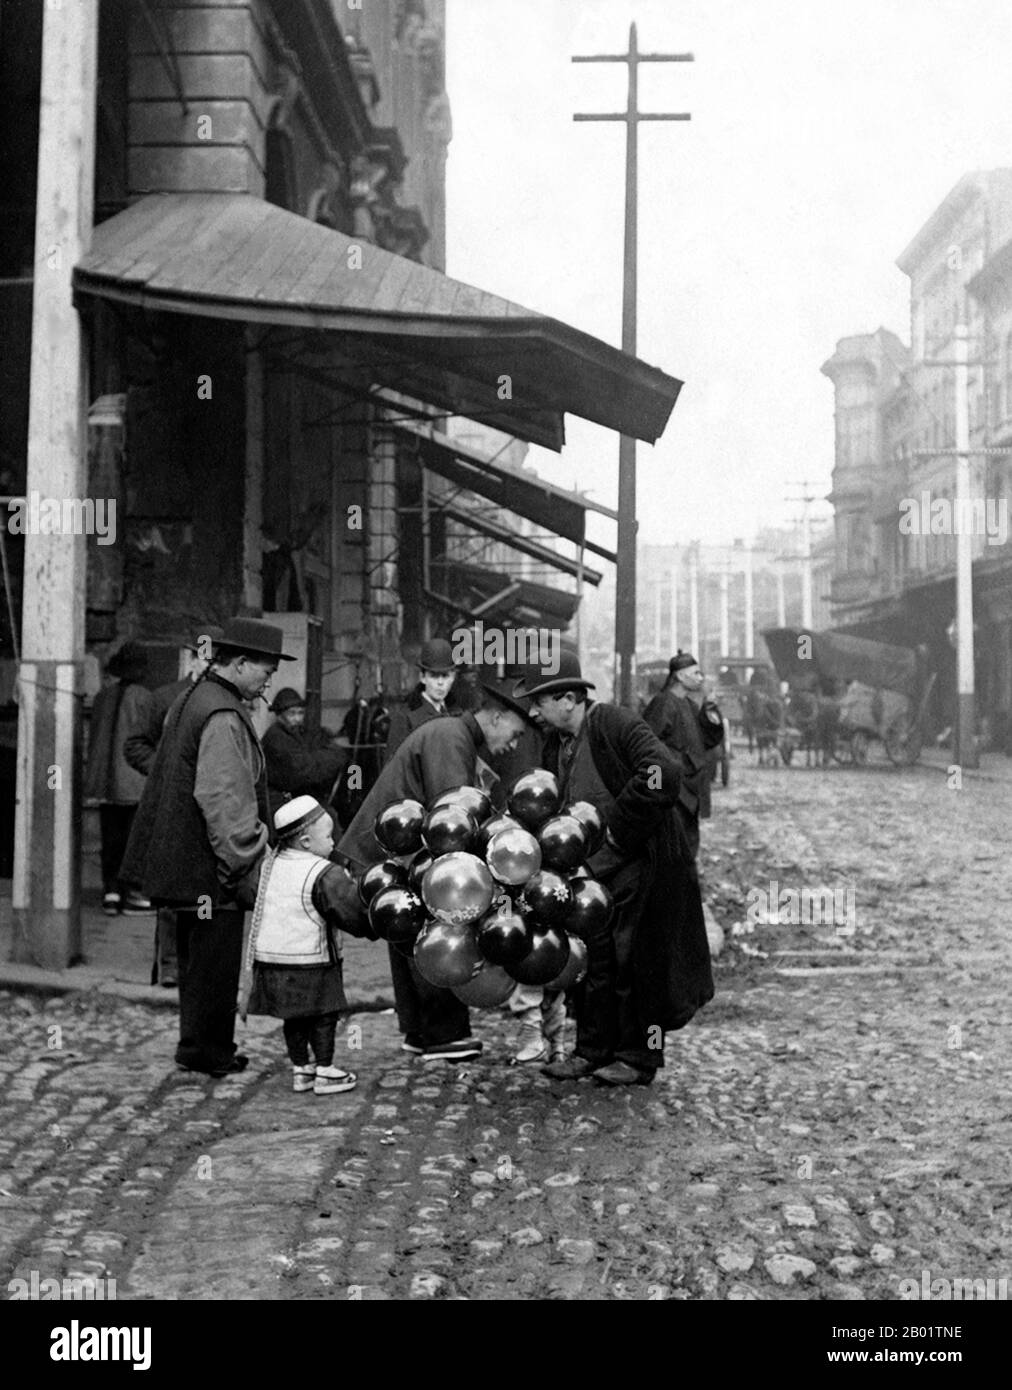 USA: Jewish man selling balloons, Oakland Chinatown. Photo by Arnold Genthe (1869-1942), early 20th century.  Oakland Chinatown dates back to the arrival of Chinese immigrants in the 1850s, making it one of the oldest Chinatowns in North America. By 1860, the census of Oakland included 96 'Asiatics' among a total of 1,543. More Chinese arrived to help build the Central Pacific Railroad western portion of the First Transcontinental Railroad during the Coolie slave trade during the 1860s.  The Chinese settled in shrimp camps on the estuary of Oakland at 1st Street and Castro in the 1850s. Stock Photo